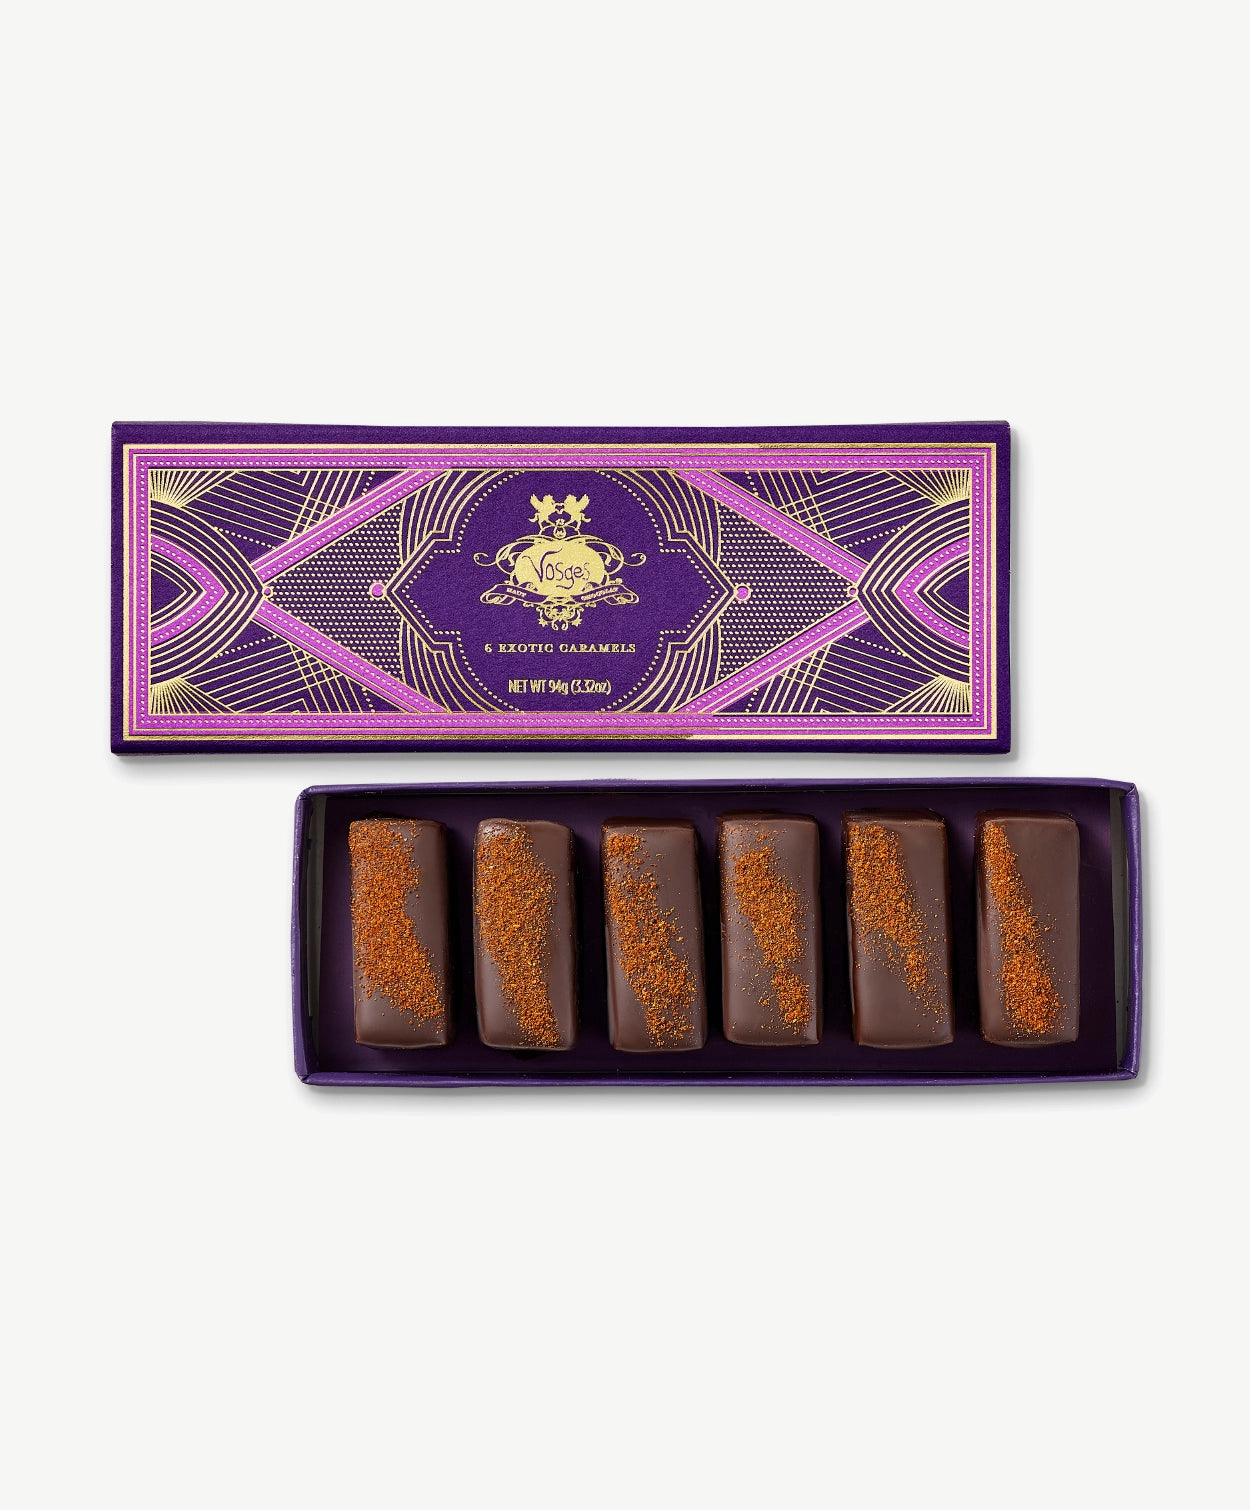 Six chocolate covered Vosges Caramels topped with Kokuto black sugar  in opened candy box embossed with gold foil on a grey background.